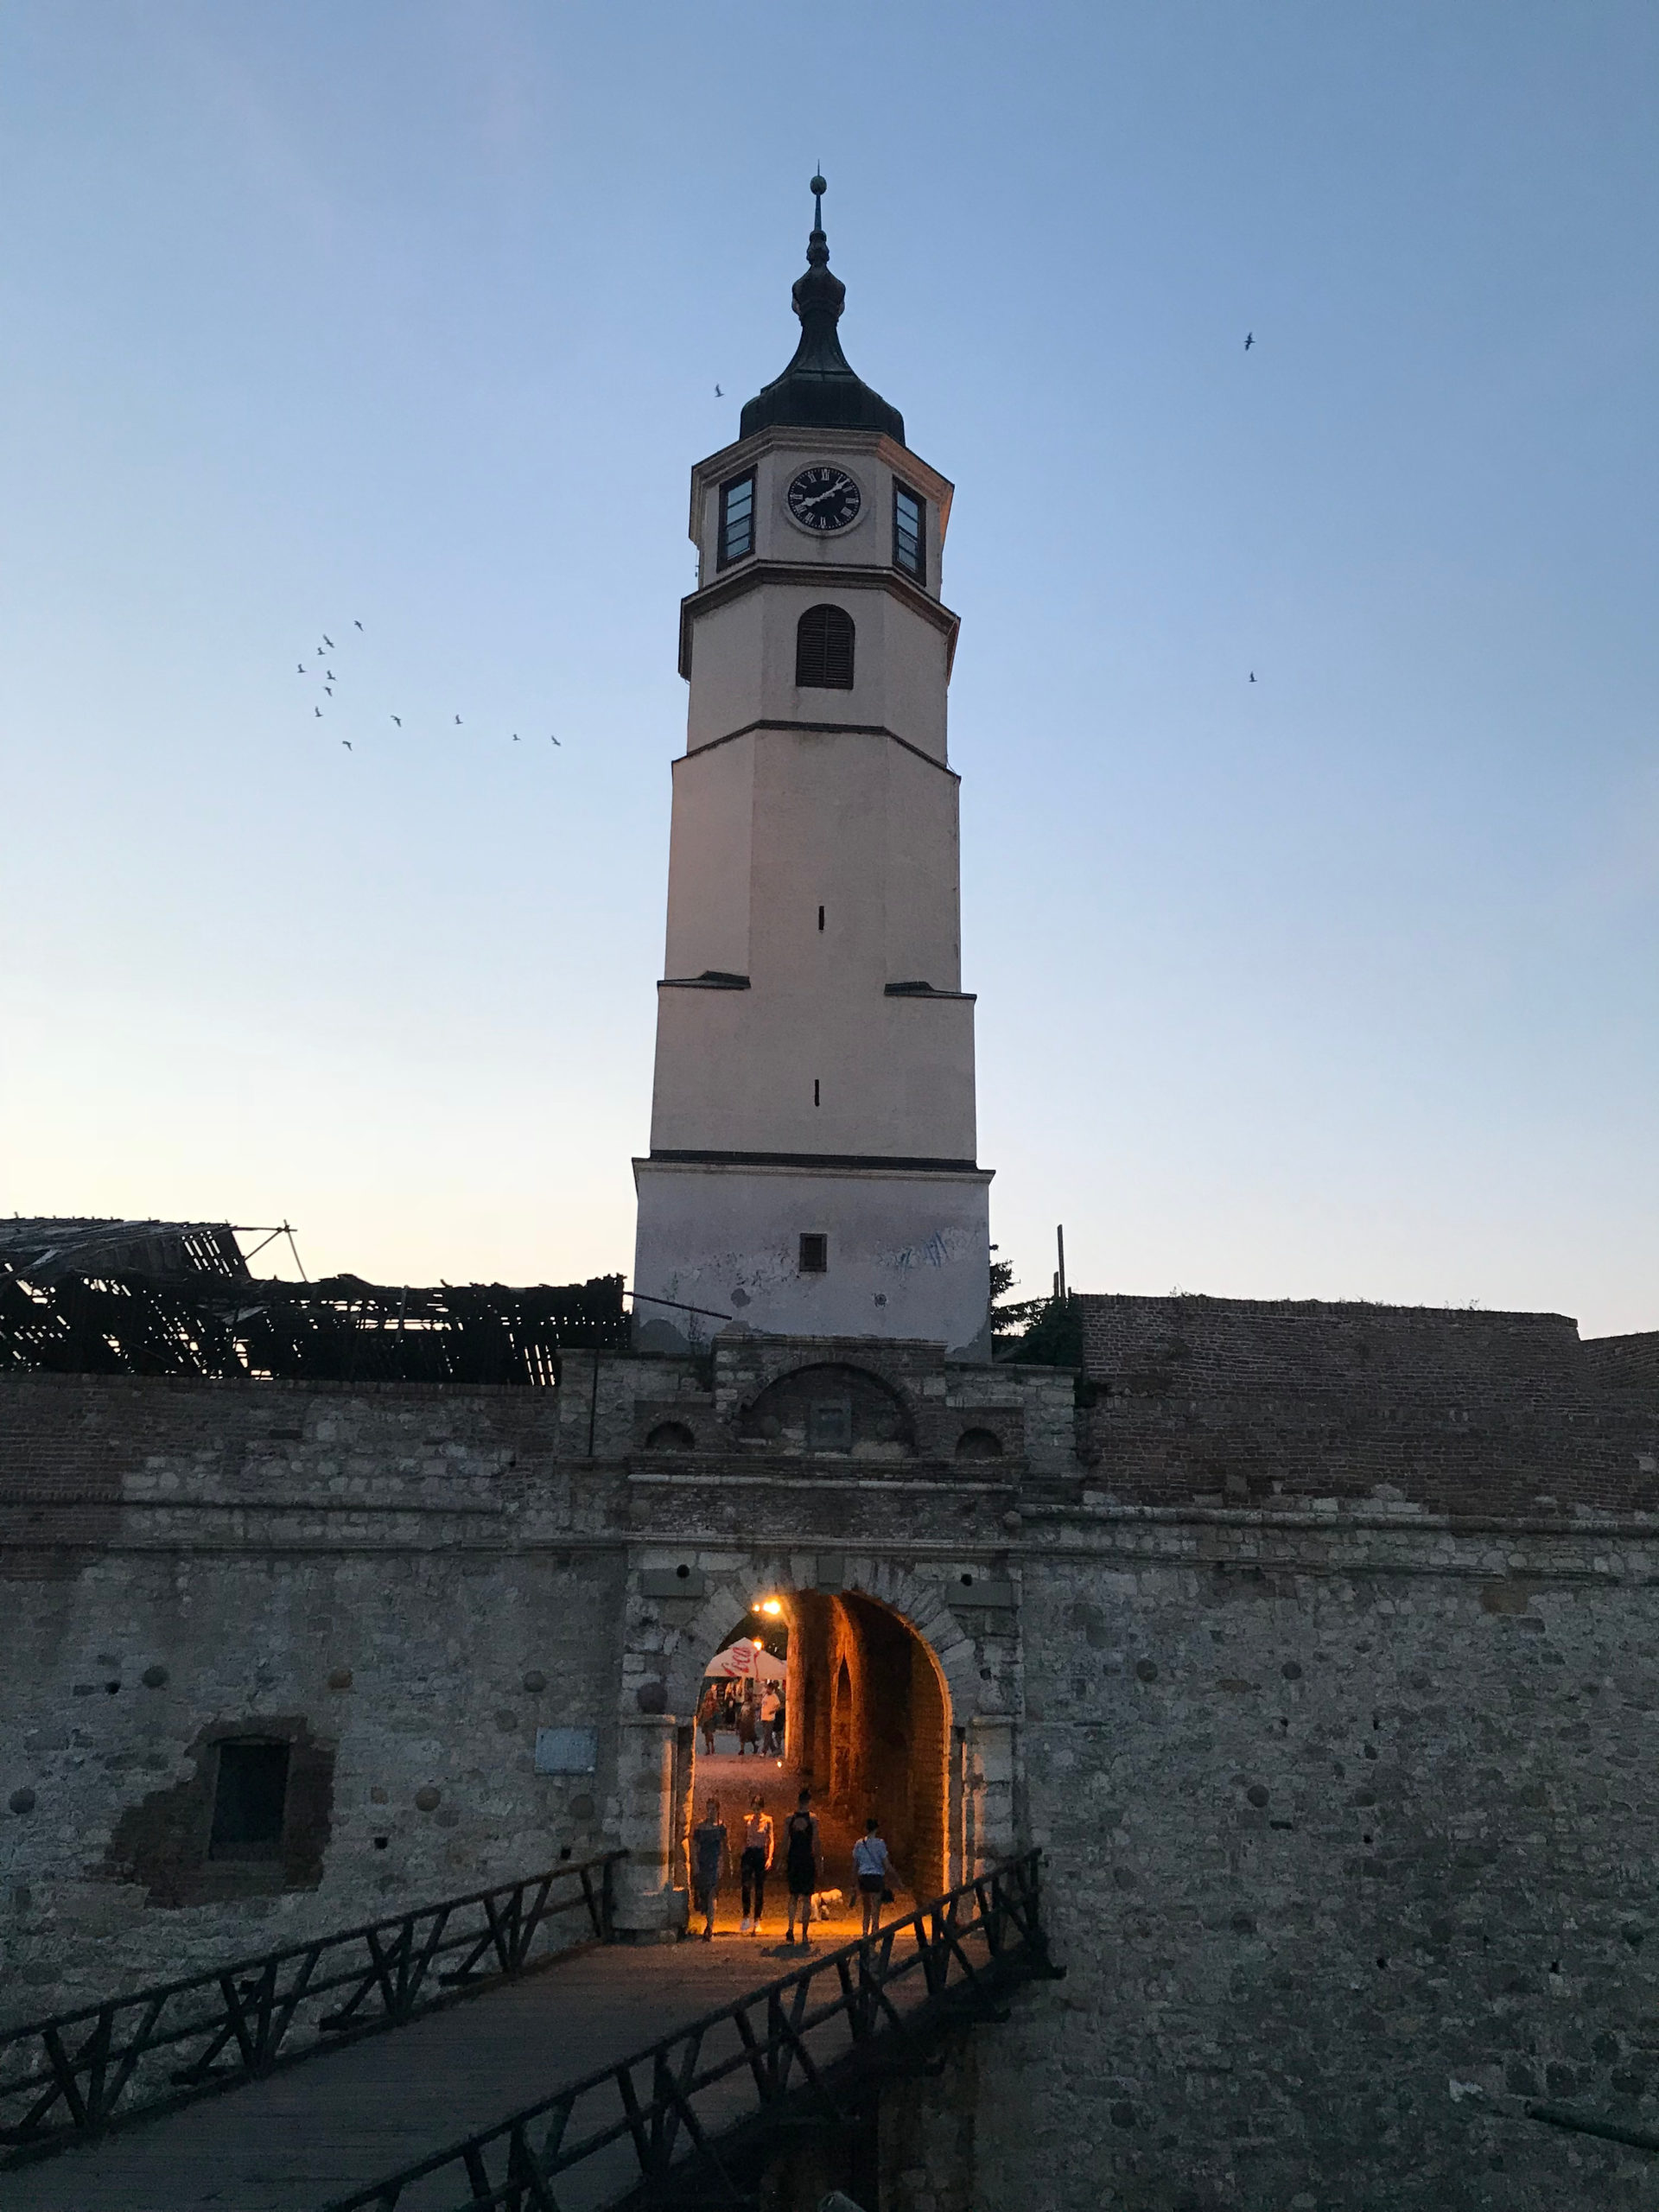 Clock Tower (Sahat) on the grounds of the Belgrade Fortress